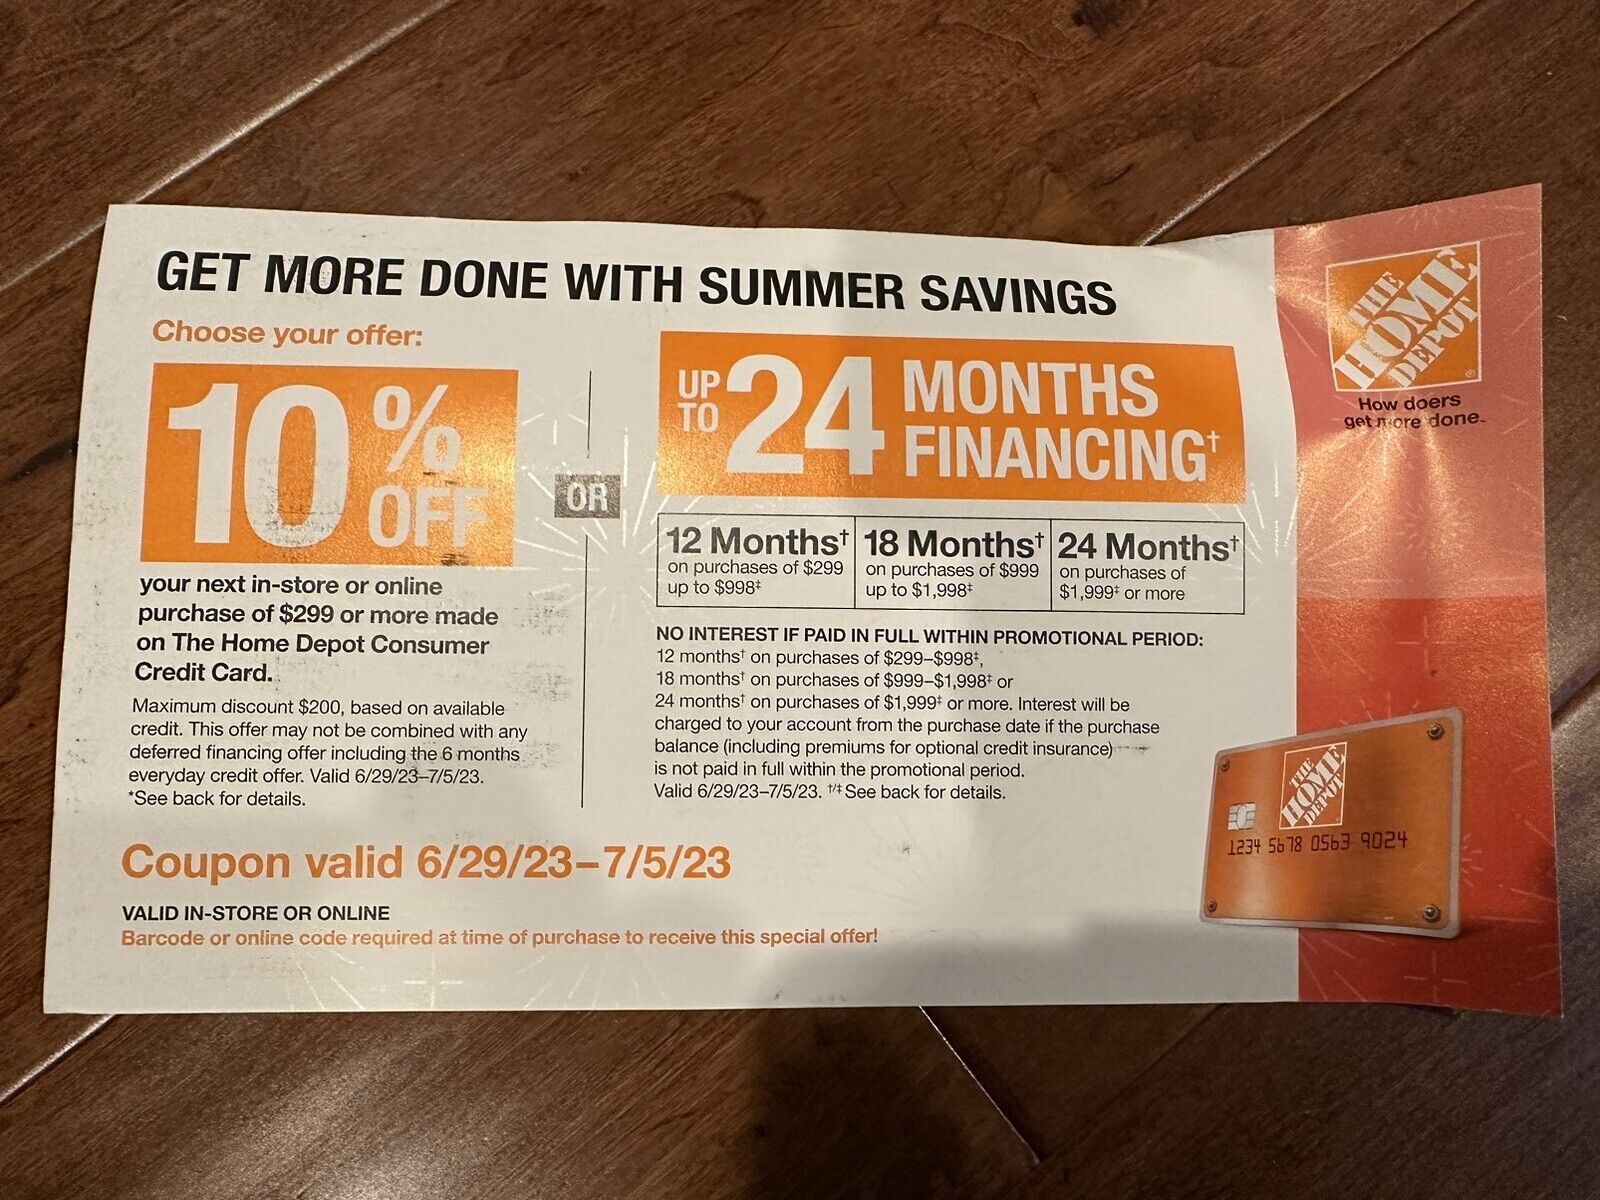 HOME DEPOT Coupon 10% IN-STORE ONLINE UP TO $200 OFF OR 24 MONTH 0% FINANCING